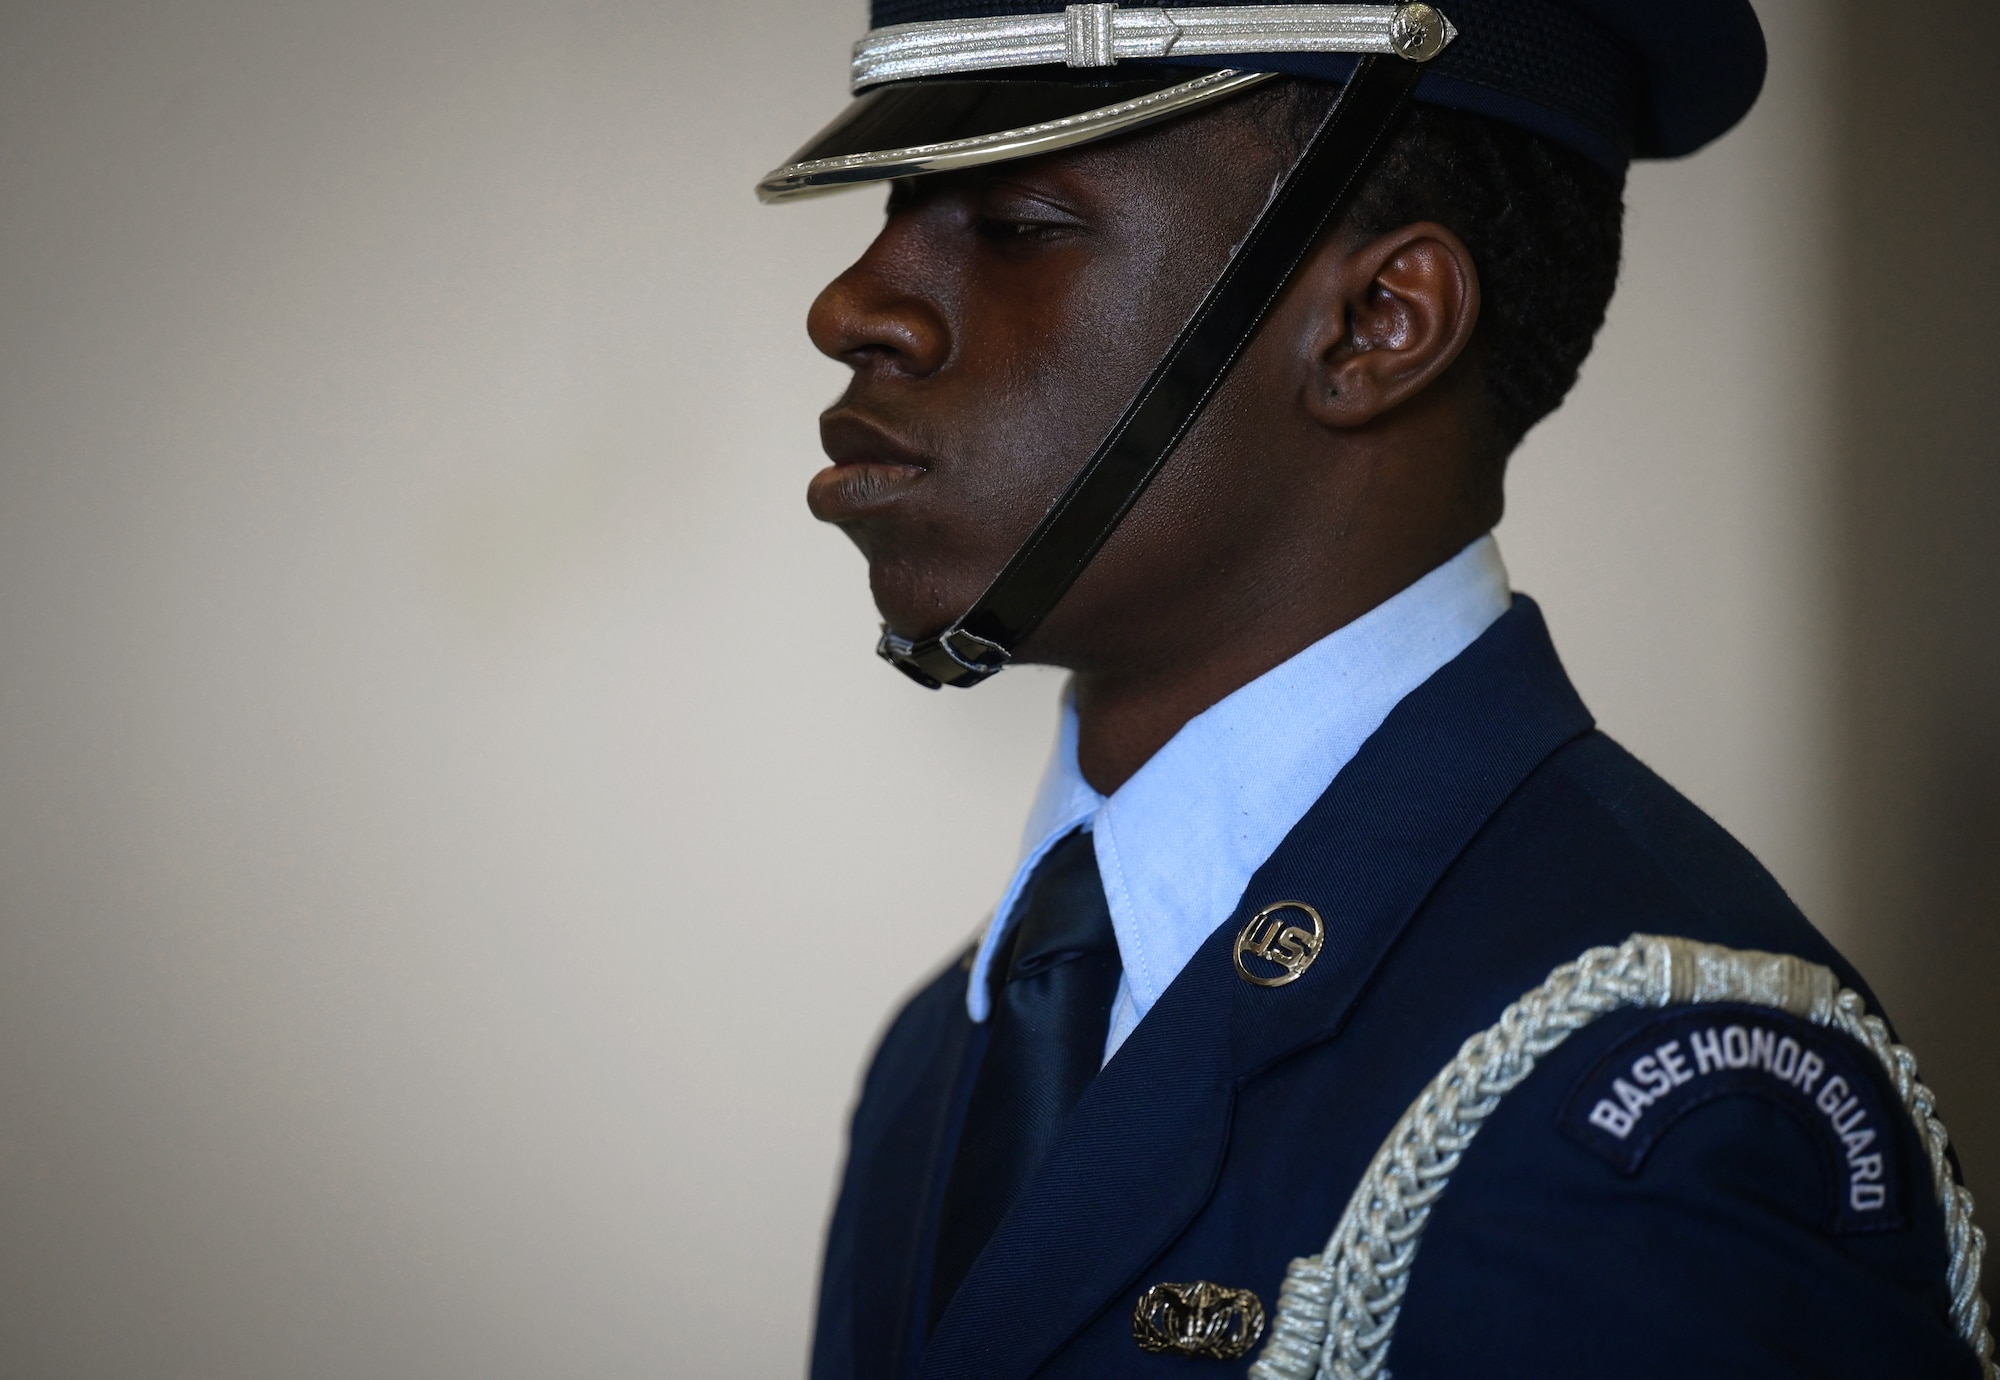 Side profile of a man in dark blue ceremonial military uniform and black cap with chin strap.